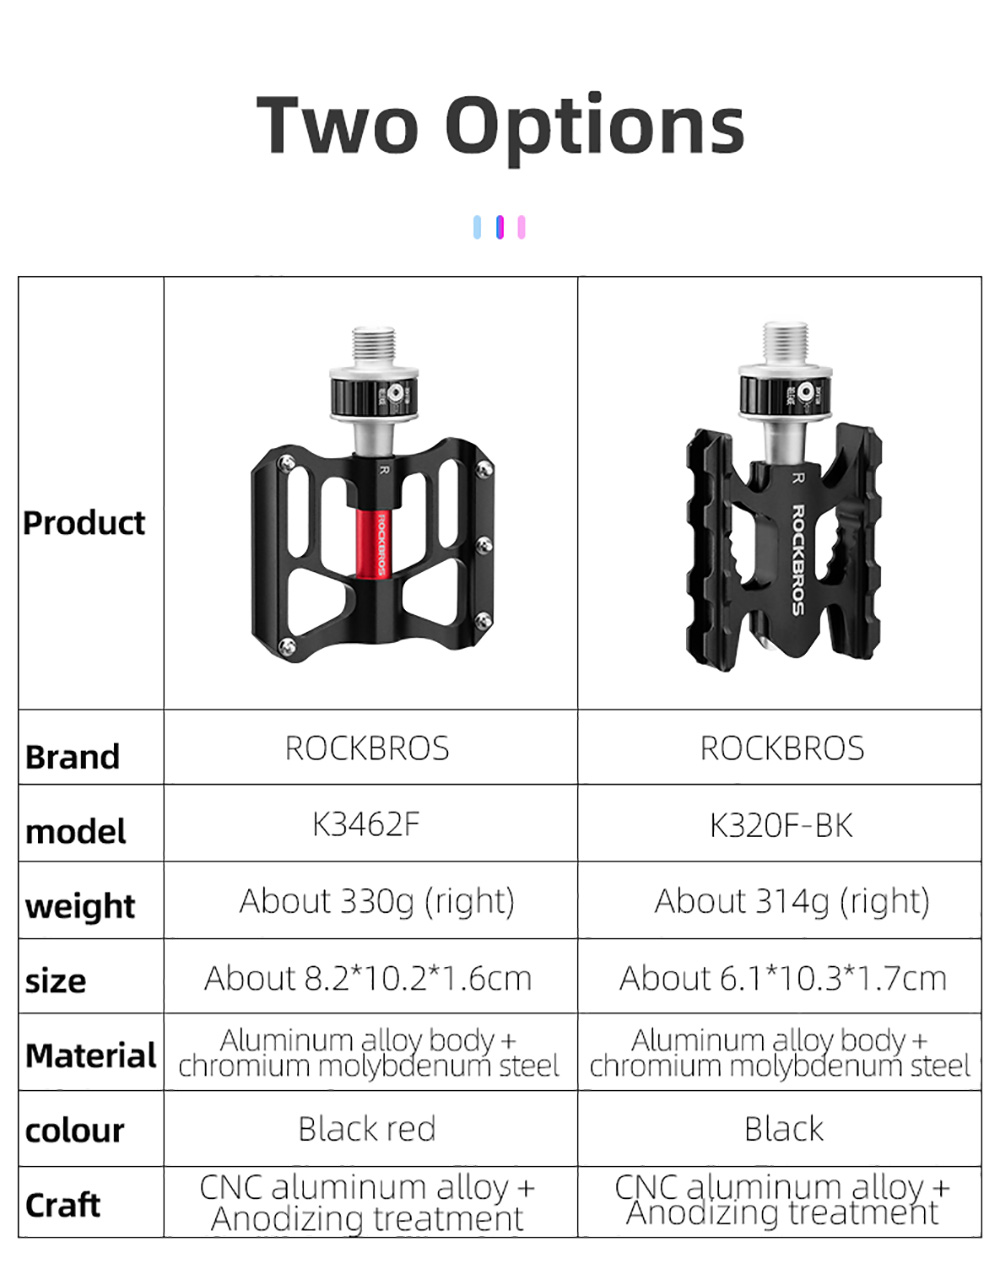 ROCKBROS Bicycle Pedals Quick Release CNC Rainproof Seal Bearing 8.2cm Widened Non-slip Chrome Molybdenum Bike Pedal